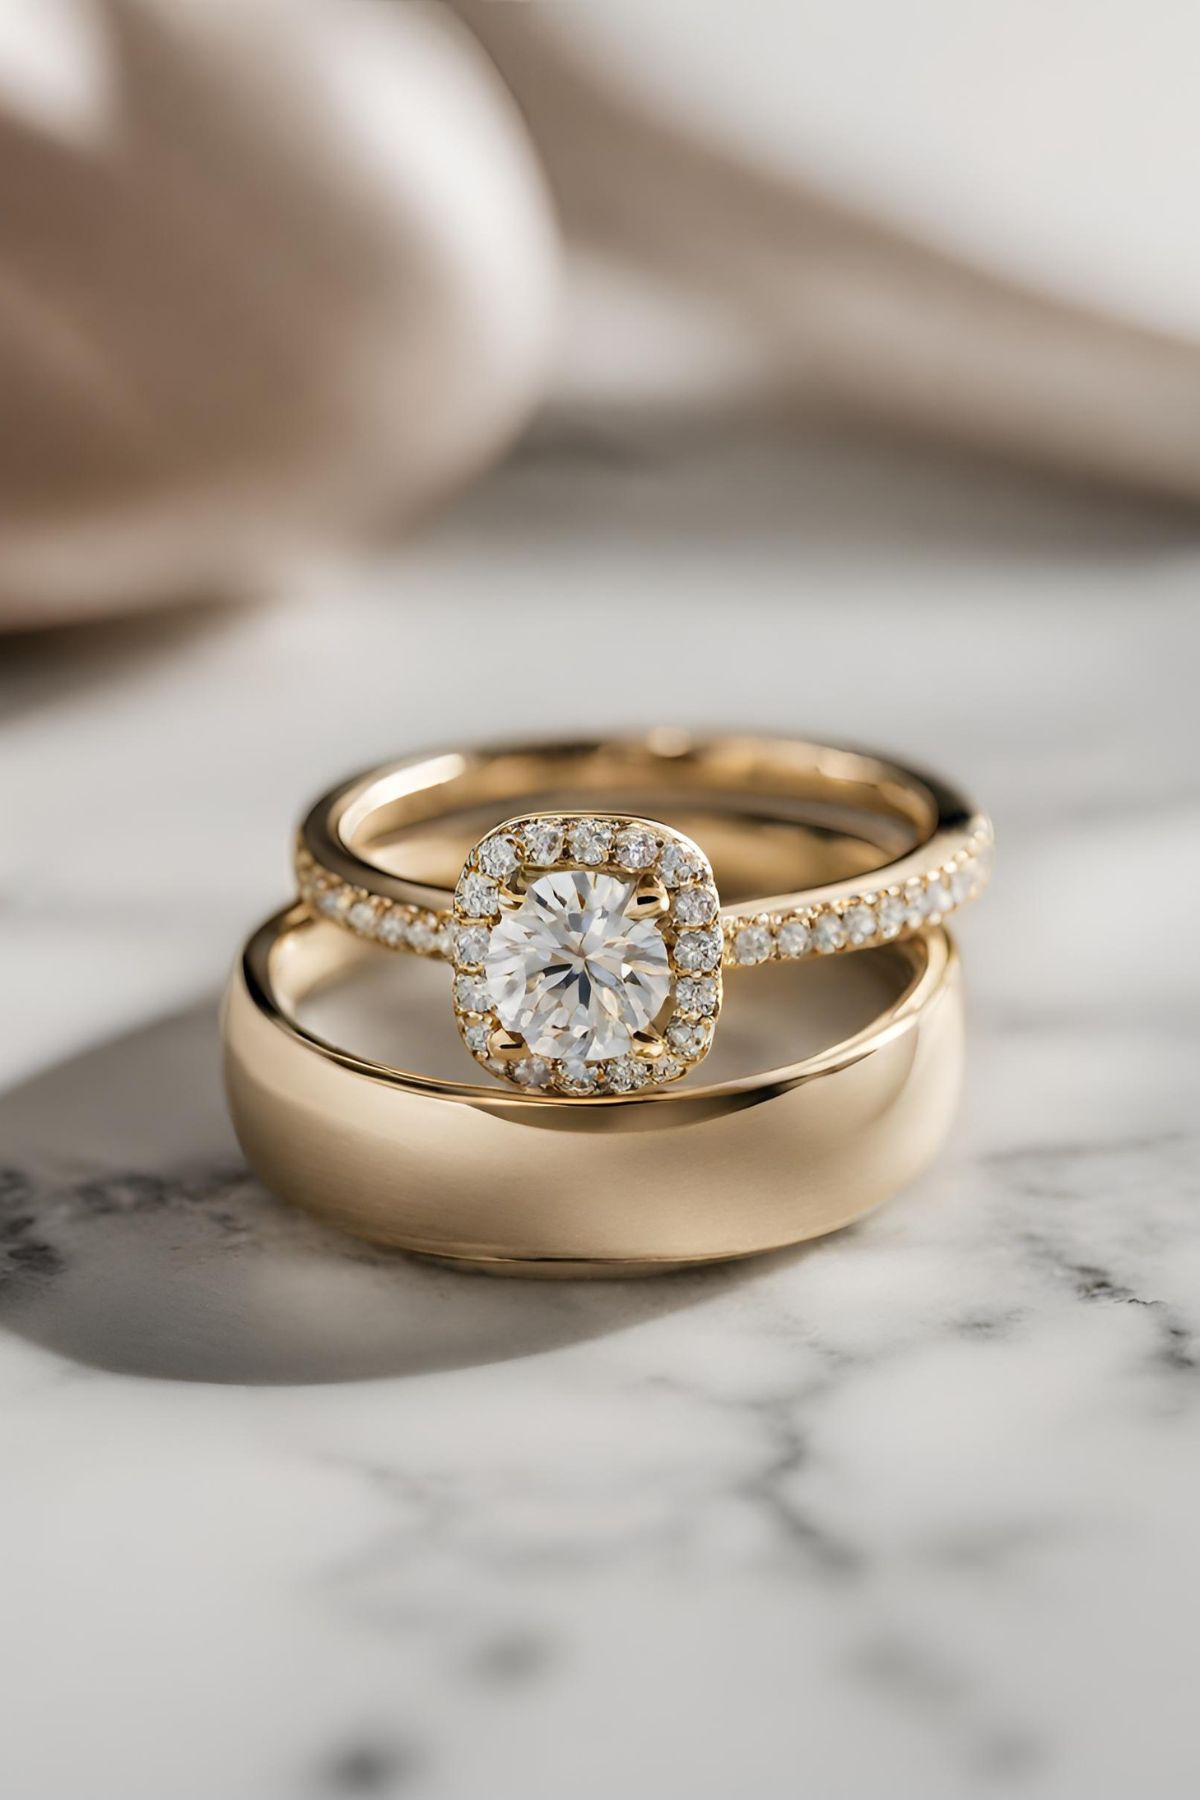 31 Unique Yellow Gold Engagement Rings - Jewelry Material Guide